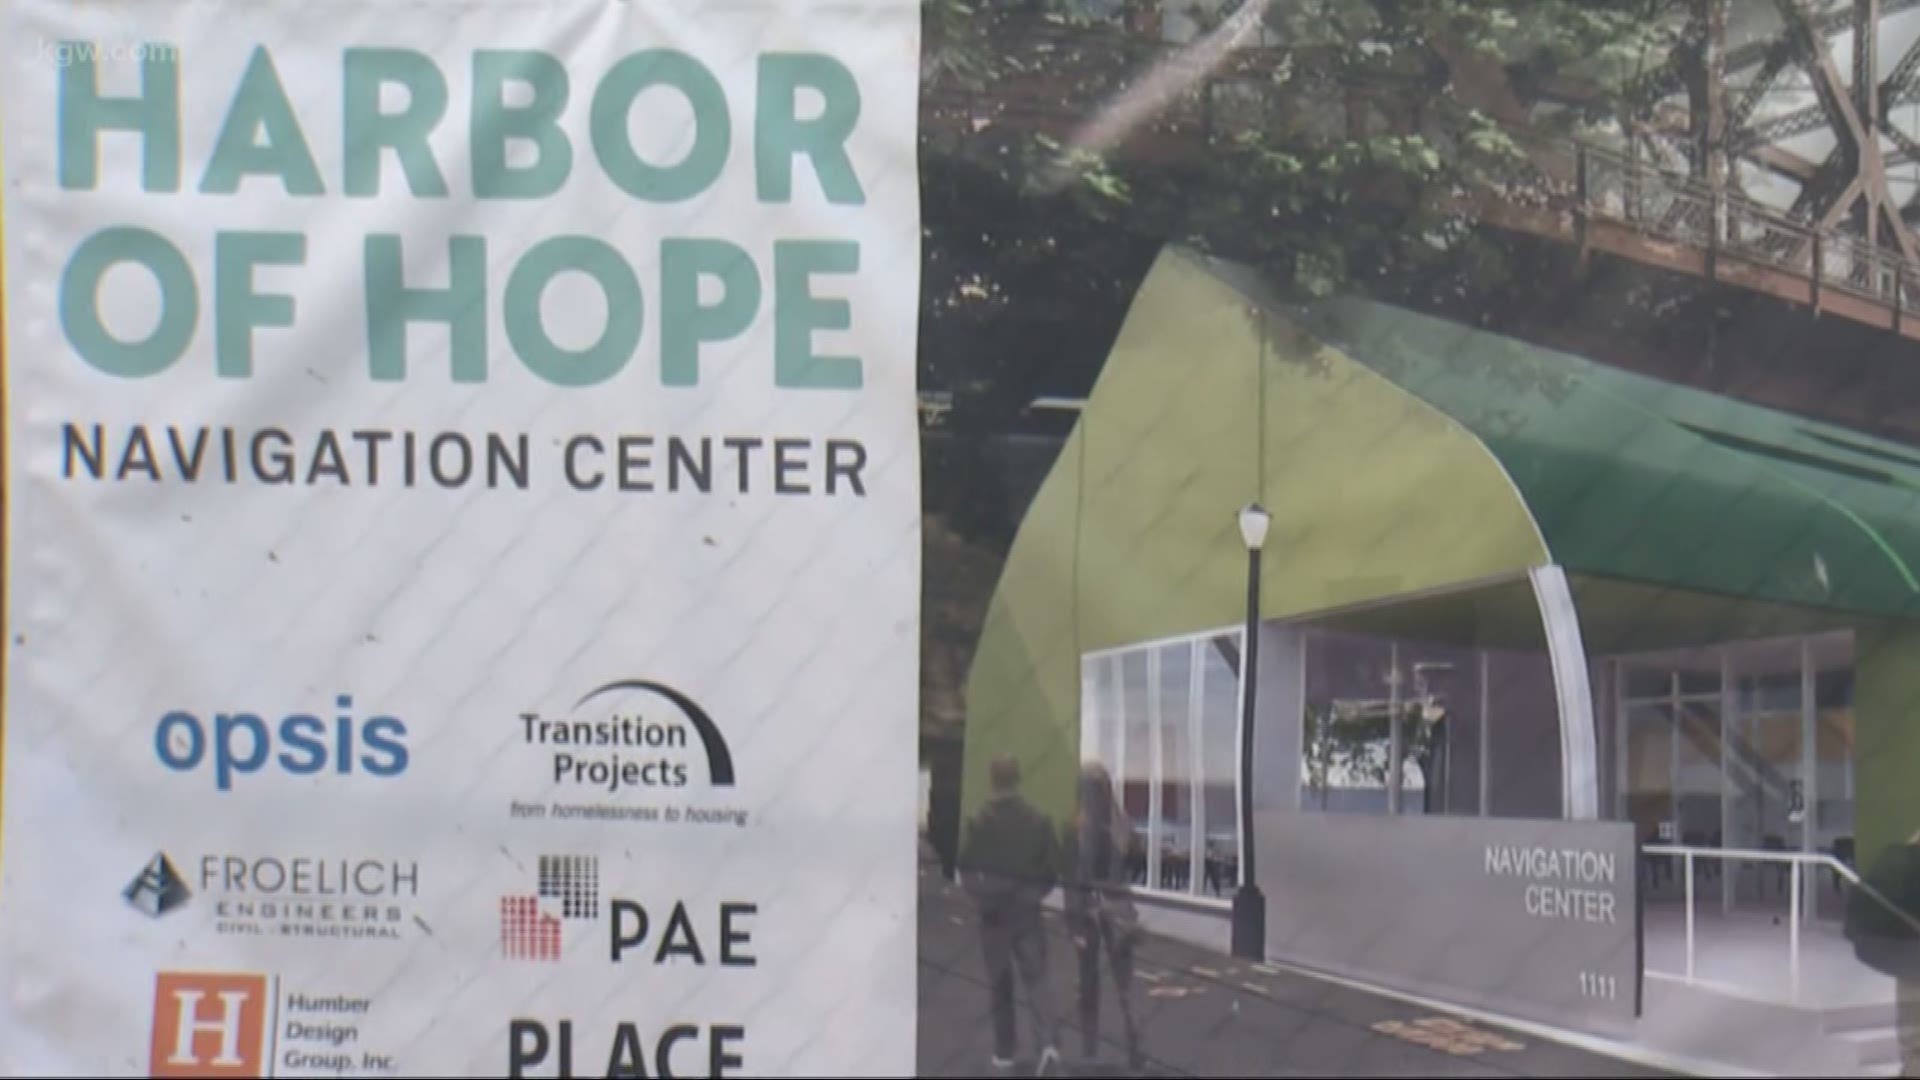 People without a place to call home will soon have a new opportunity to get off the street and back on their feet. It's called the Oregon Harbor of Hope Navigation Center and it'll help up to 100 people at a time.